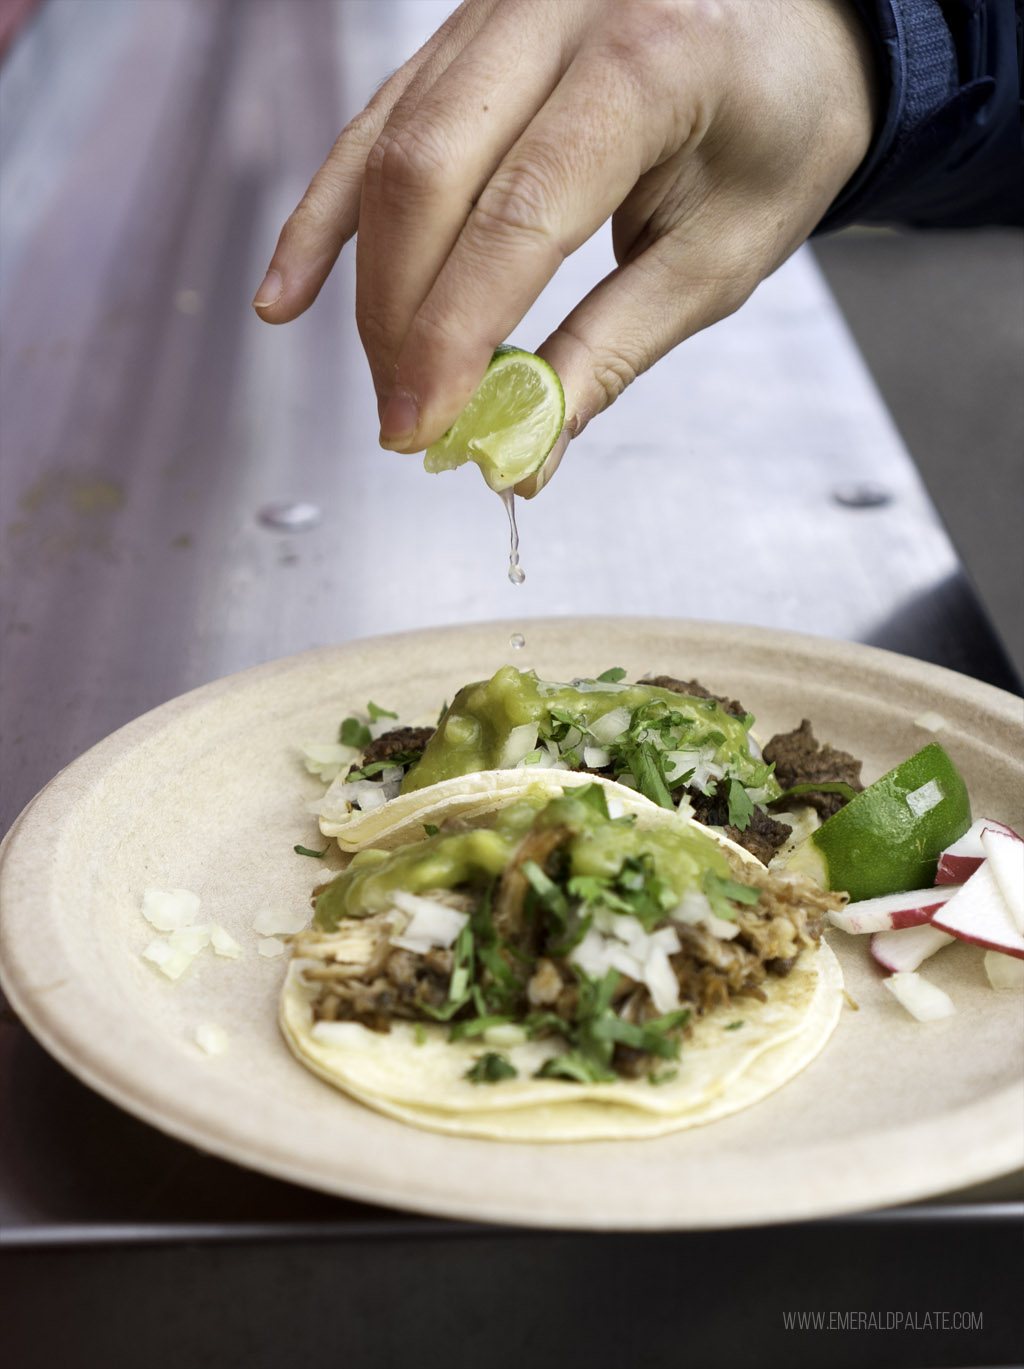 person squeezing lime juice on tacos